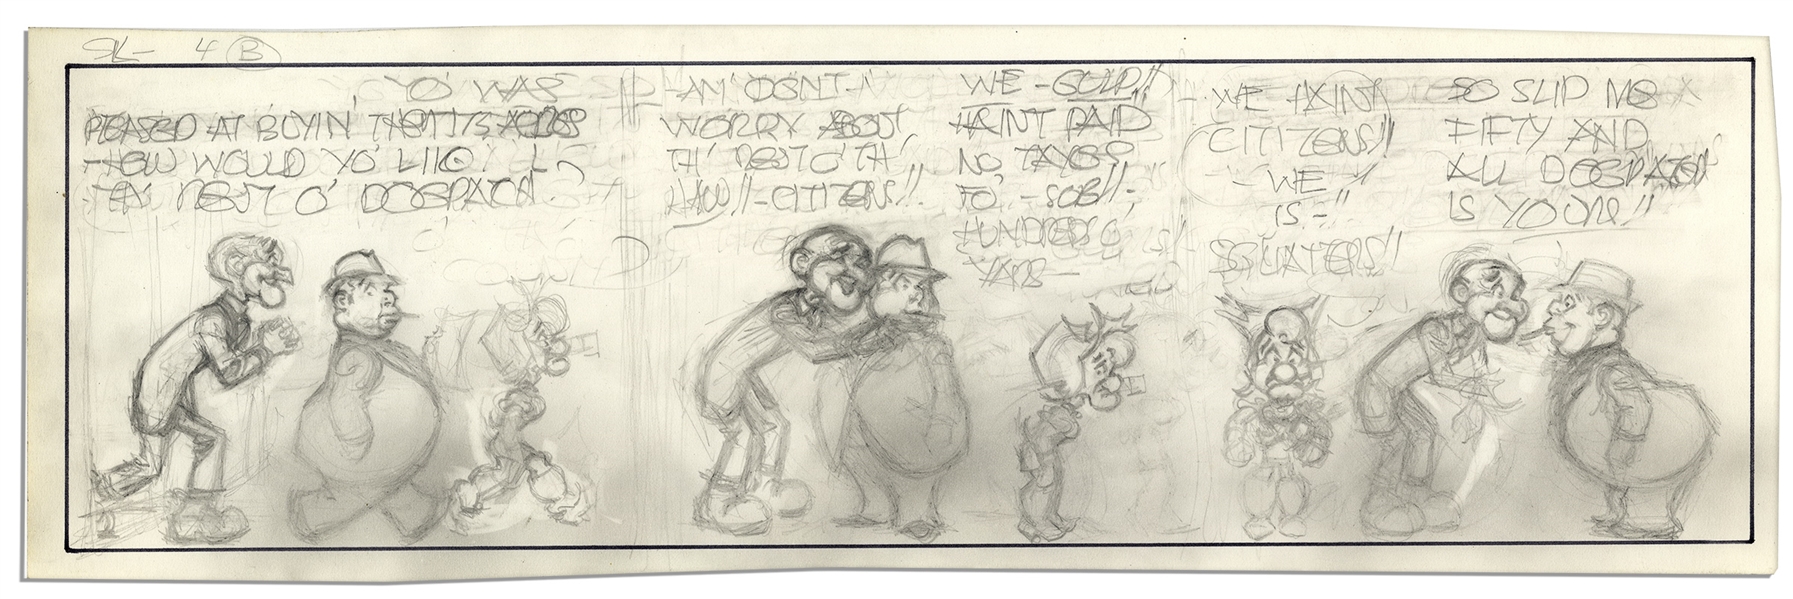 ''Li'l Abner'' Unfinished Comic Strip by Al Capp in Pencil -- Undated & Untitled Strip Features Mammy Yokum -- 19.5'' x 6'' -- Very Good -- From the Al Capp Estate